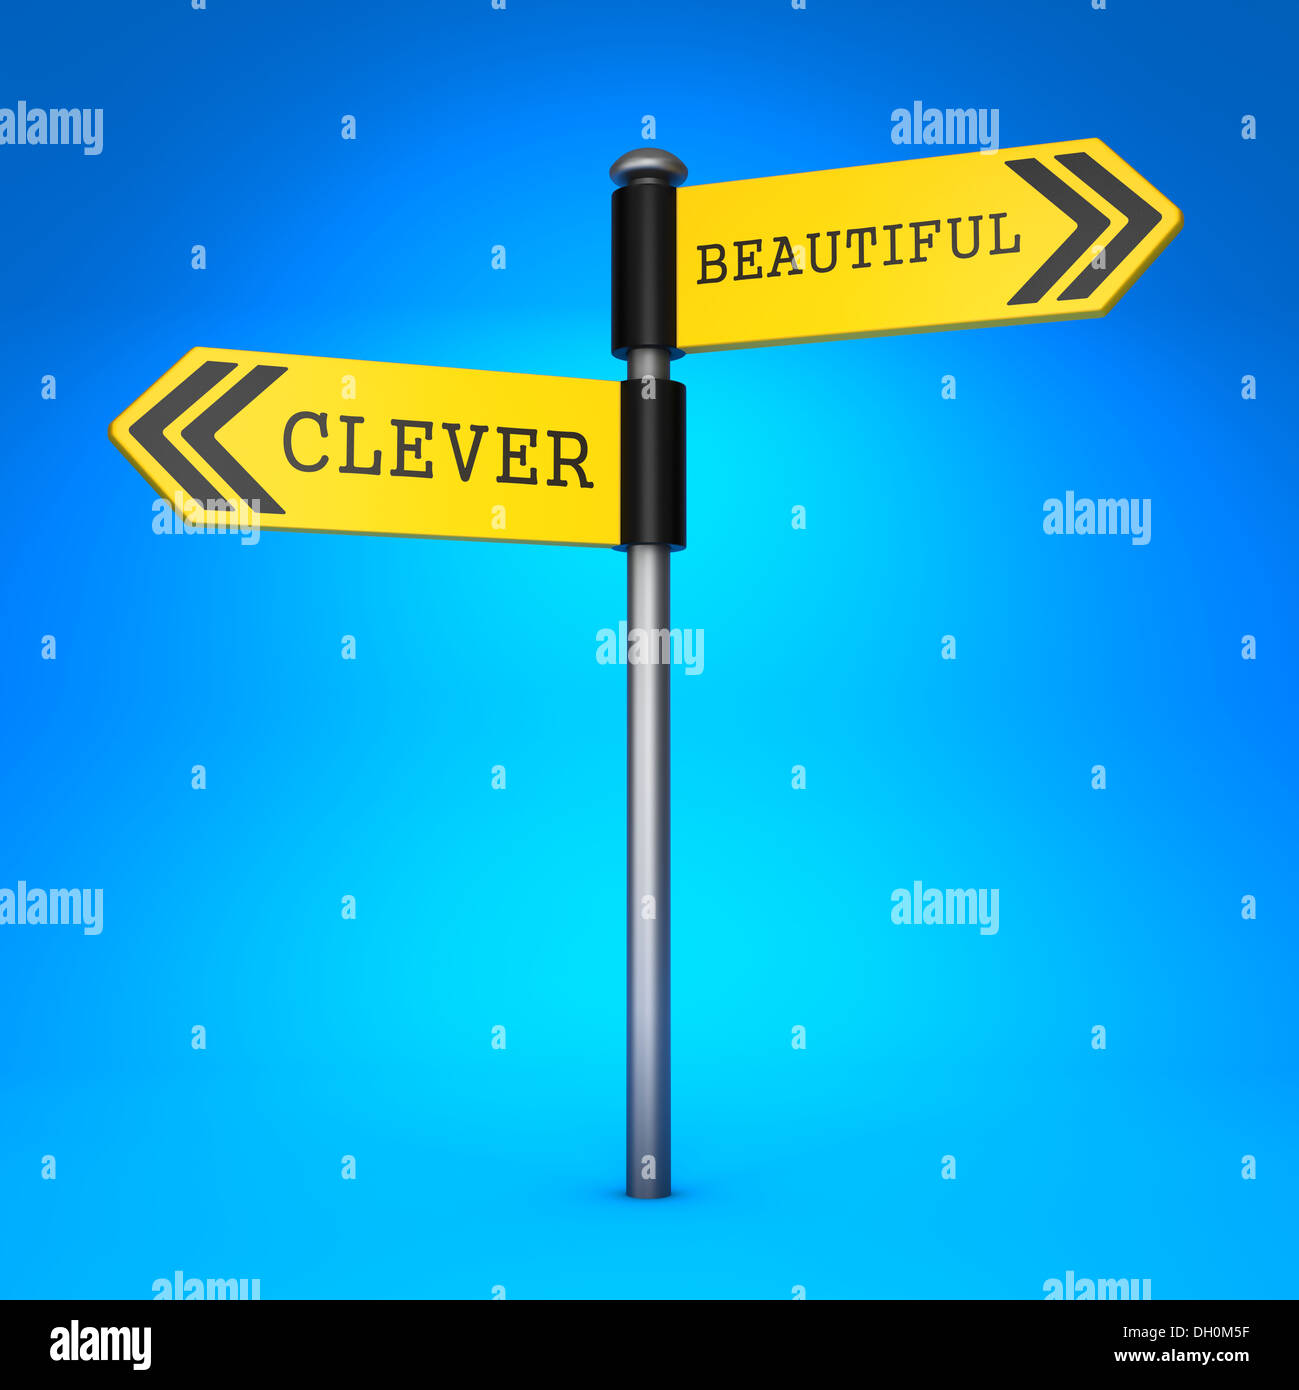 Clever or Beautiful. Concept of Choice. Stock Photo